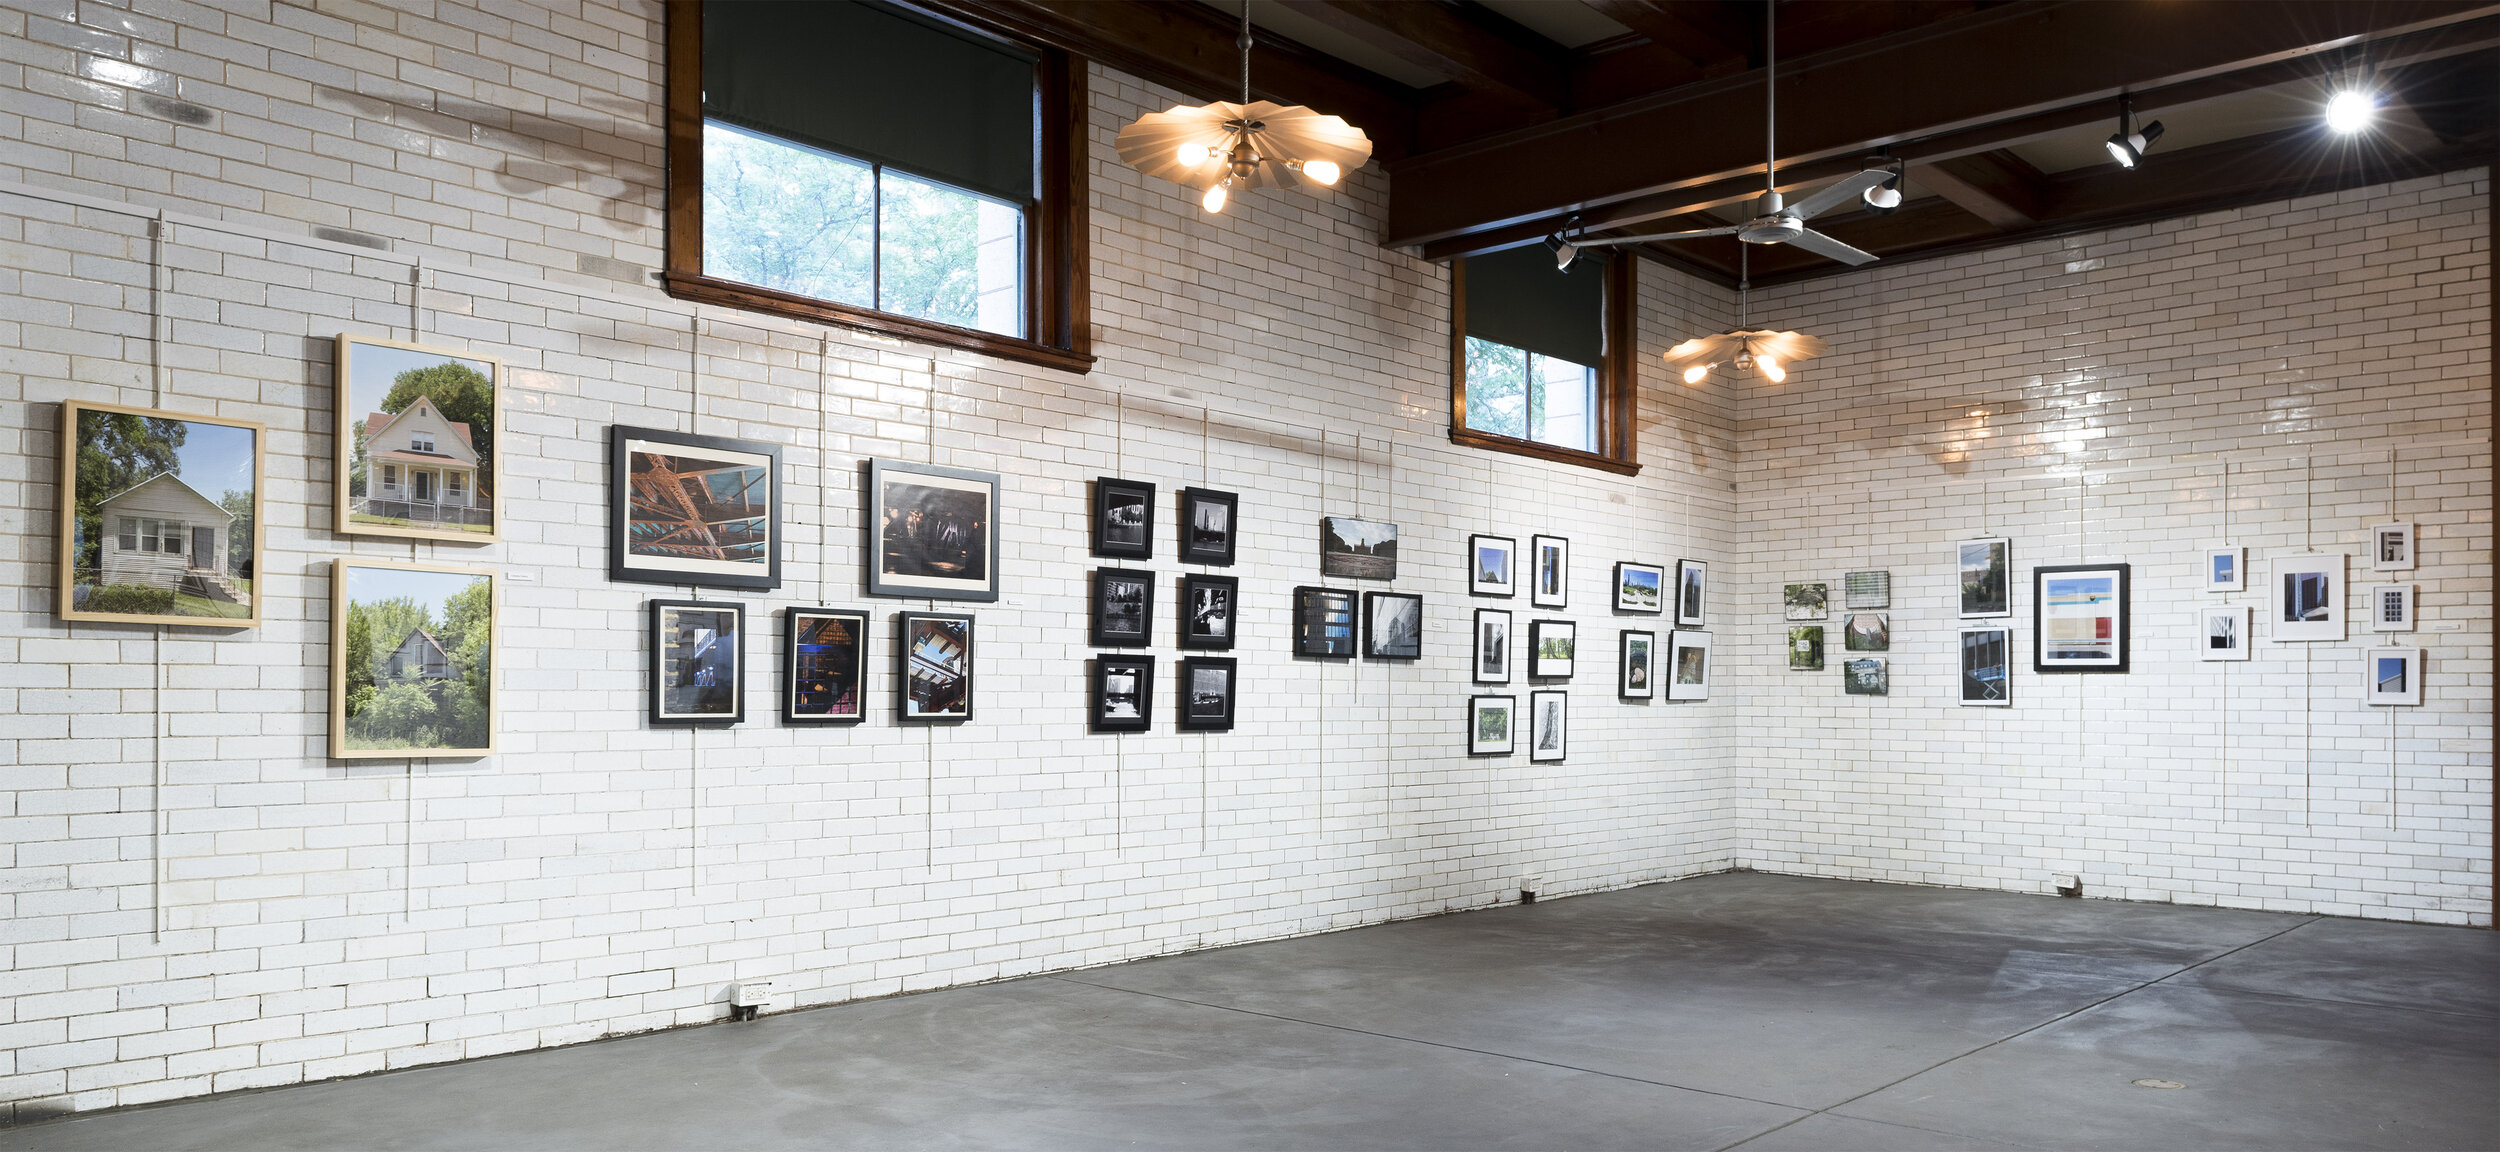  Installation view of the  Imaging Mass &amp; Space  exhibition at Glessner House. 